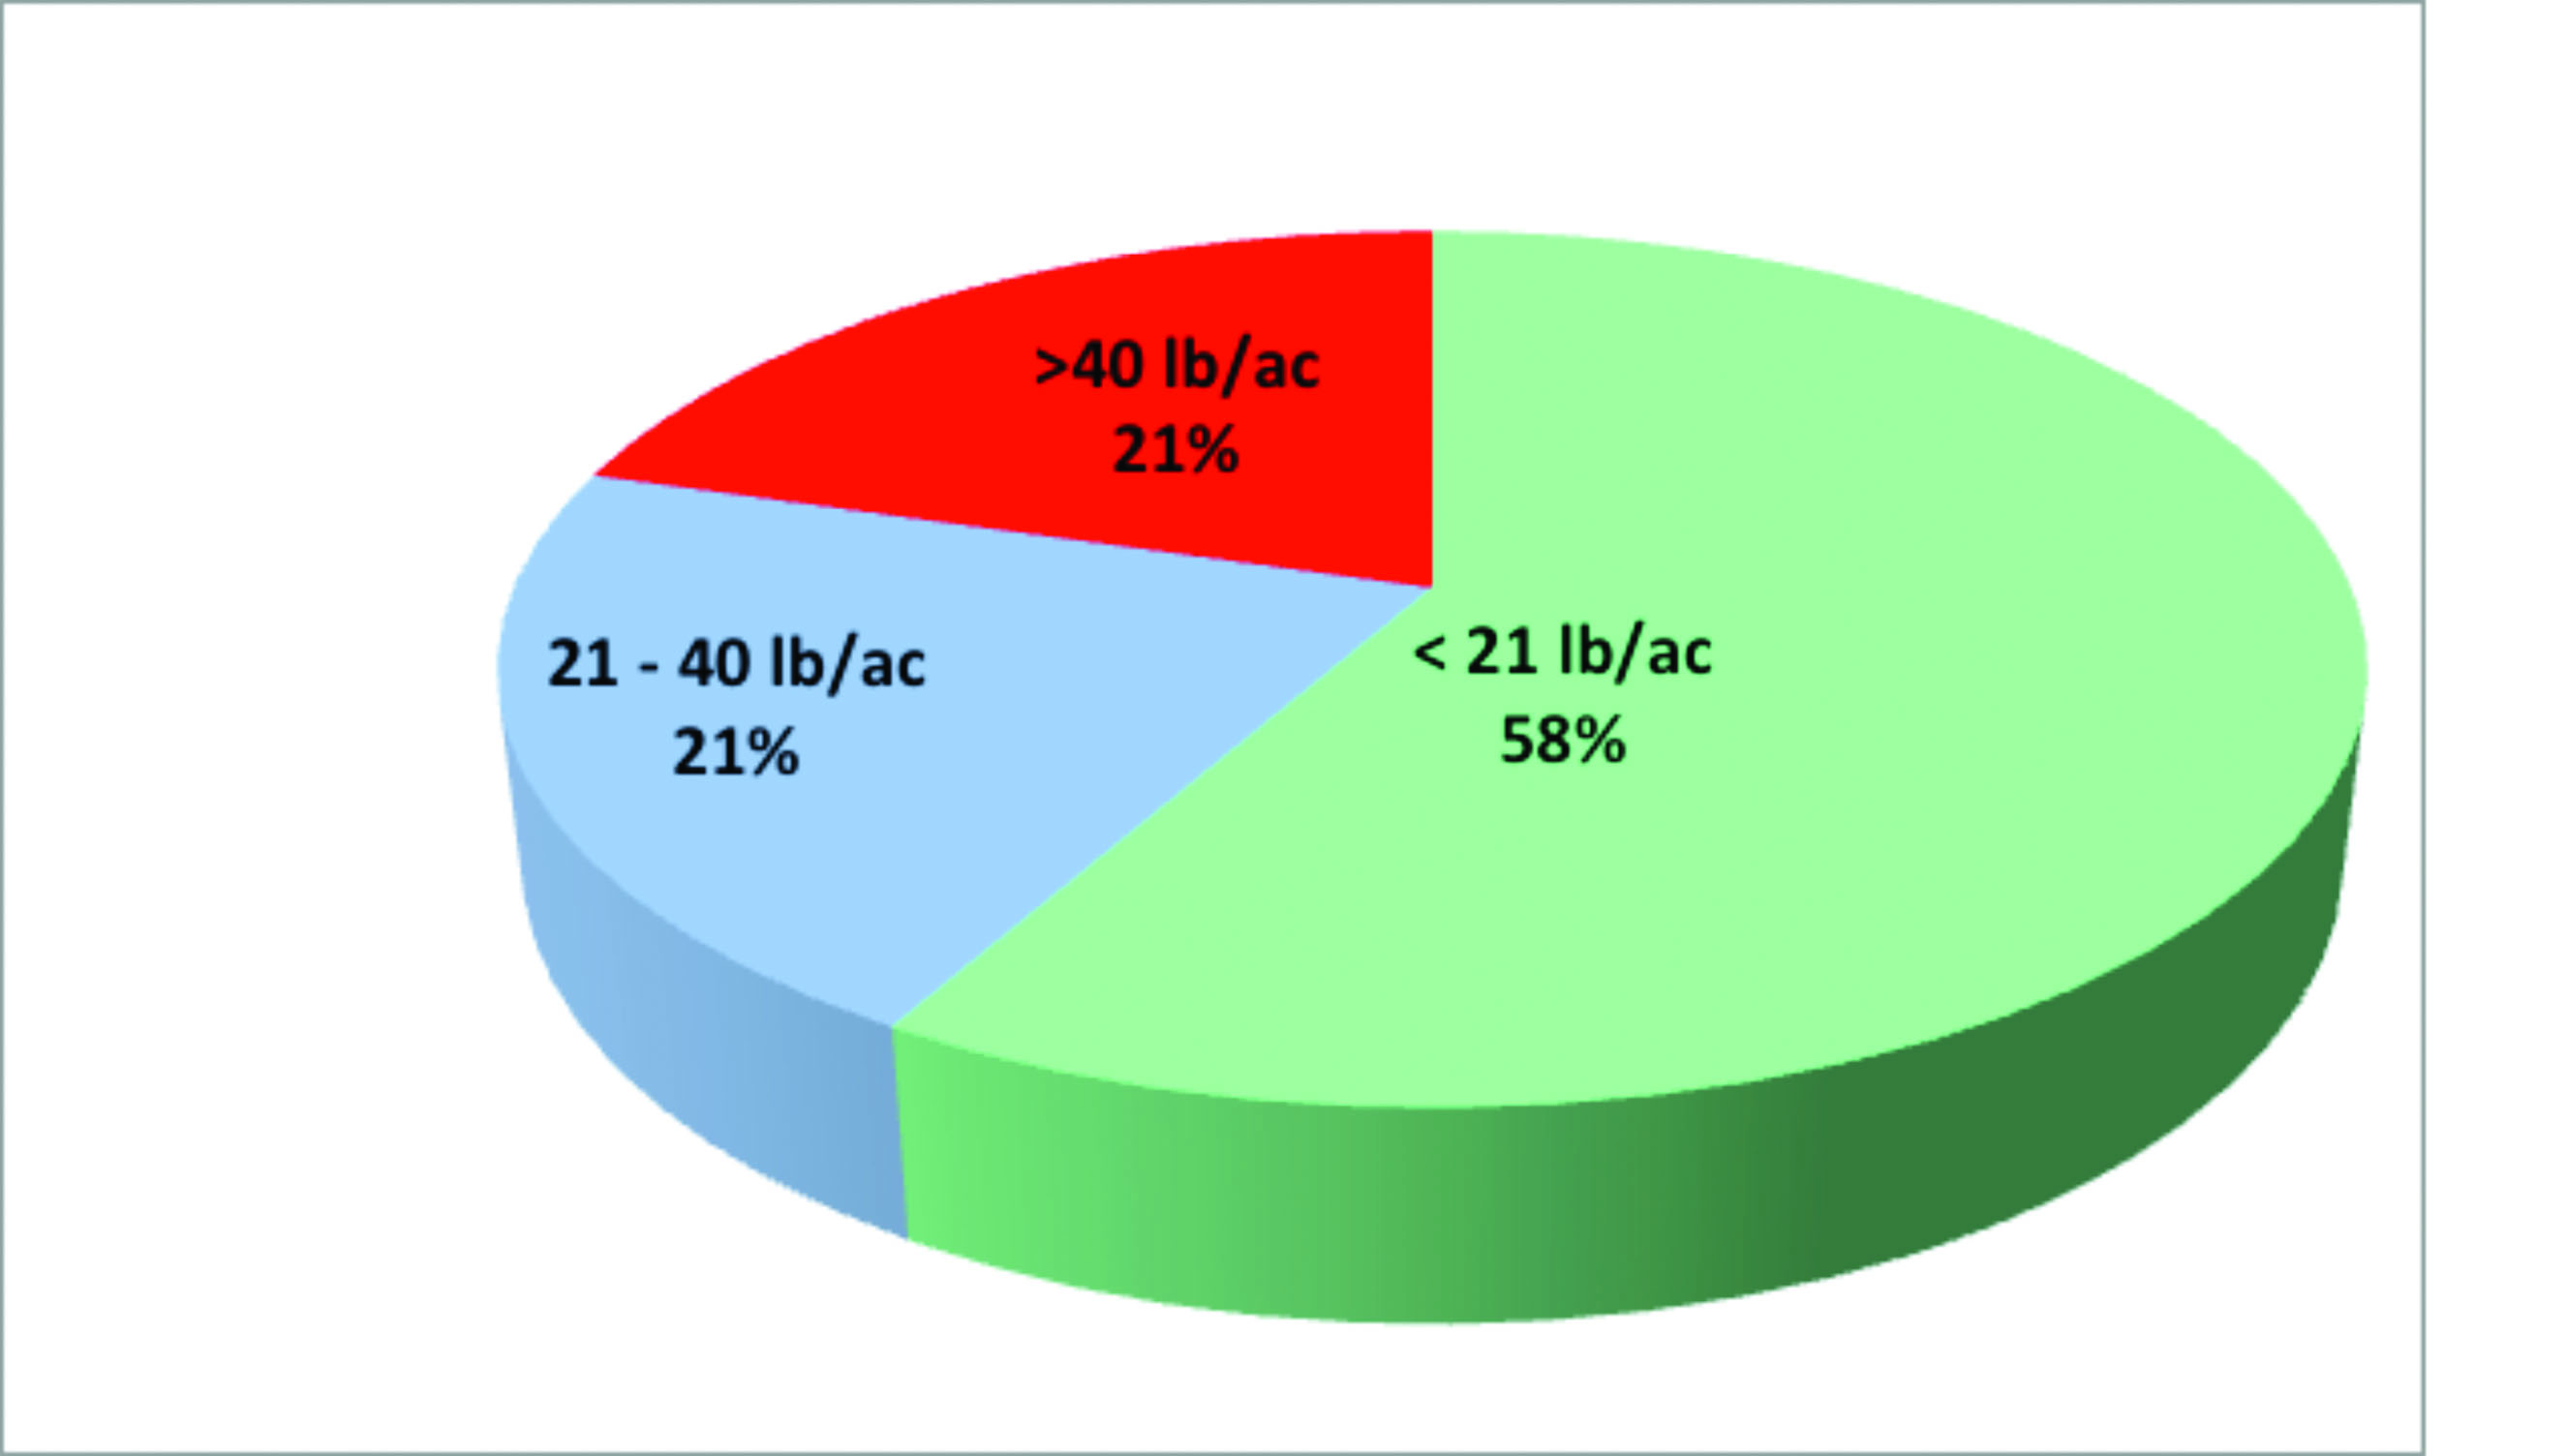 A pie chart showing the Soil nitrate - N distribution and the recommended level of N being at 21-40 lb/ac.